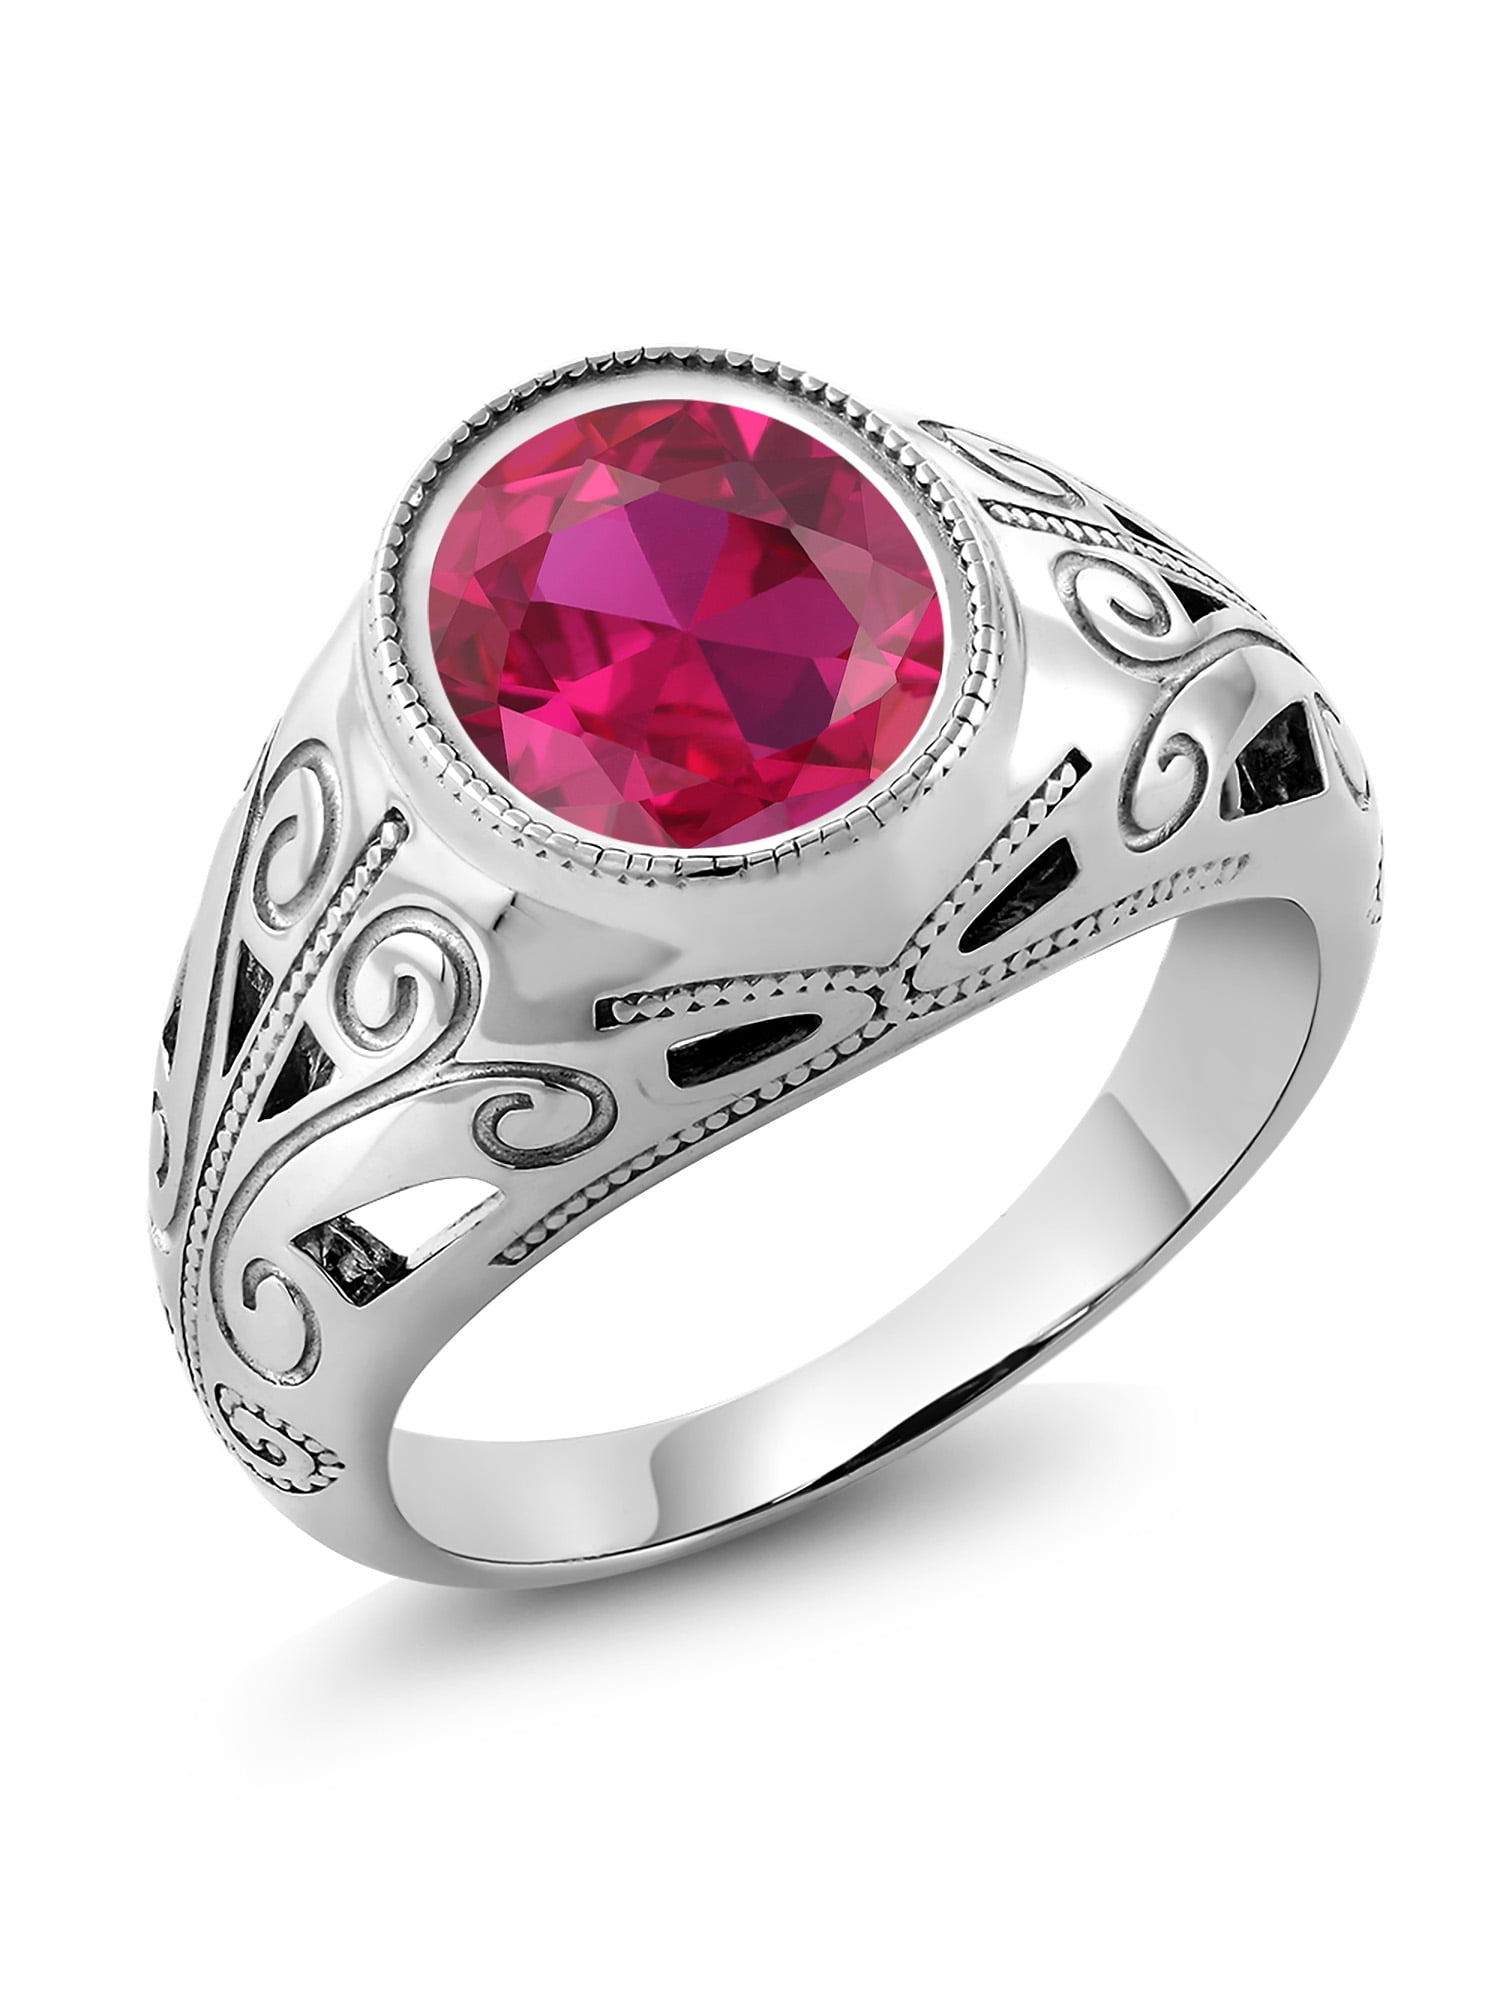 2 CT RED TEAR RUBY SOLID 925 Sterling Silver 14K Gold Finish Cubic Cocktail Ring 